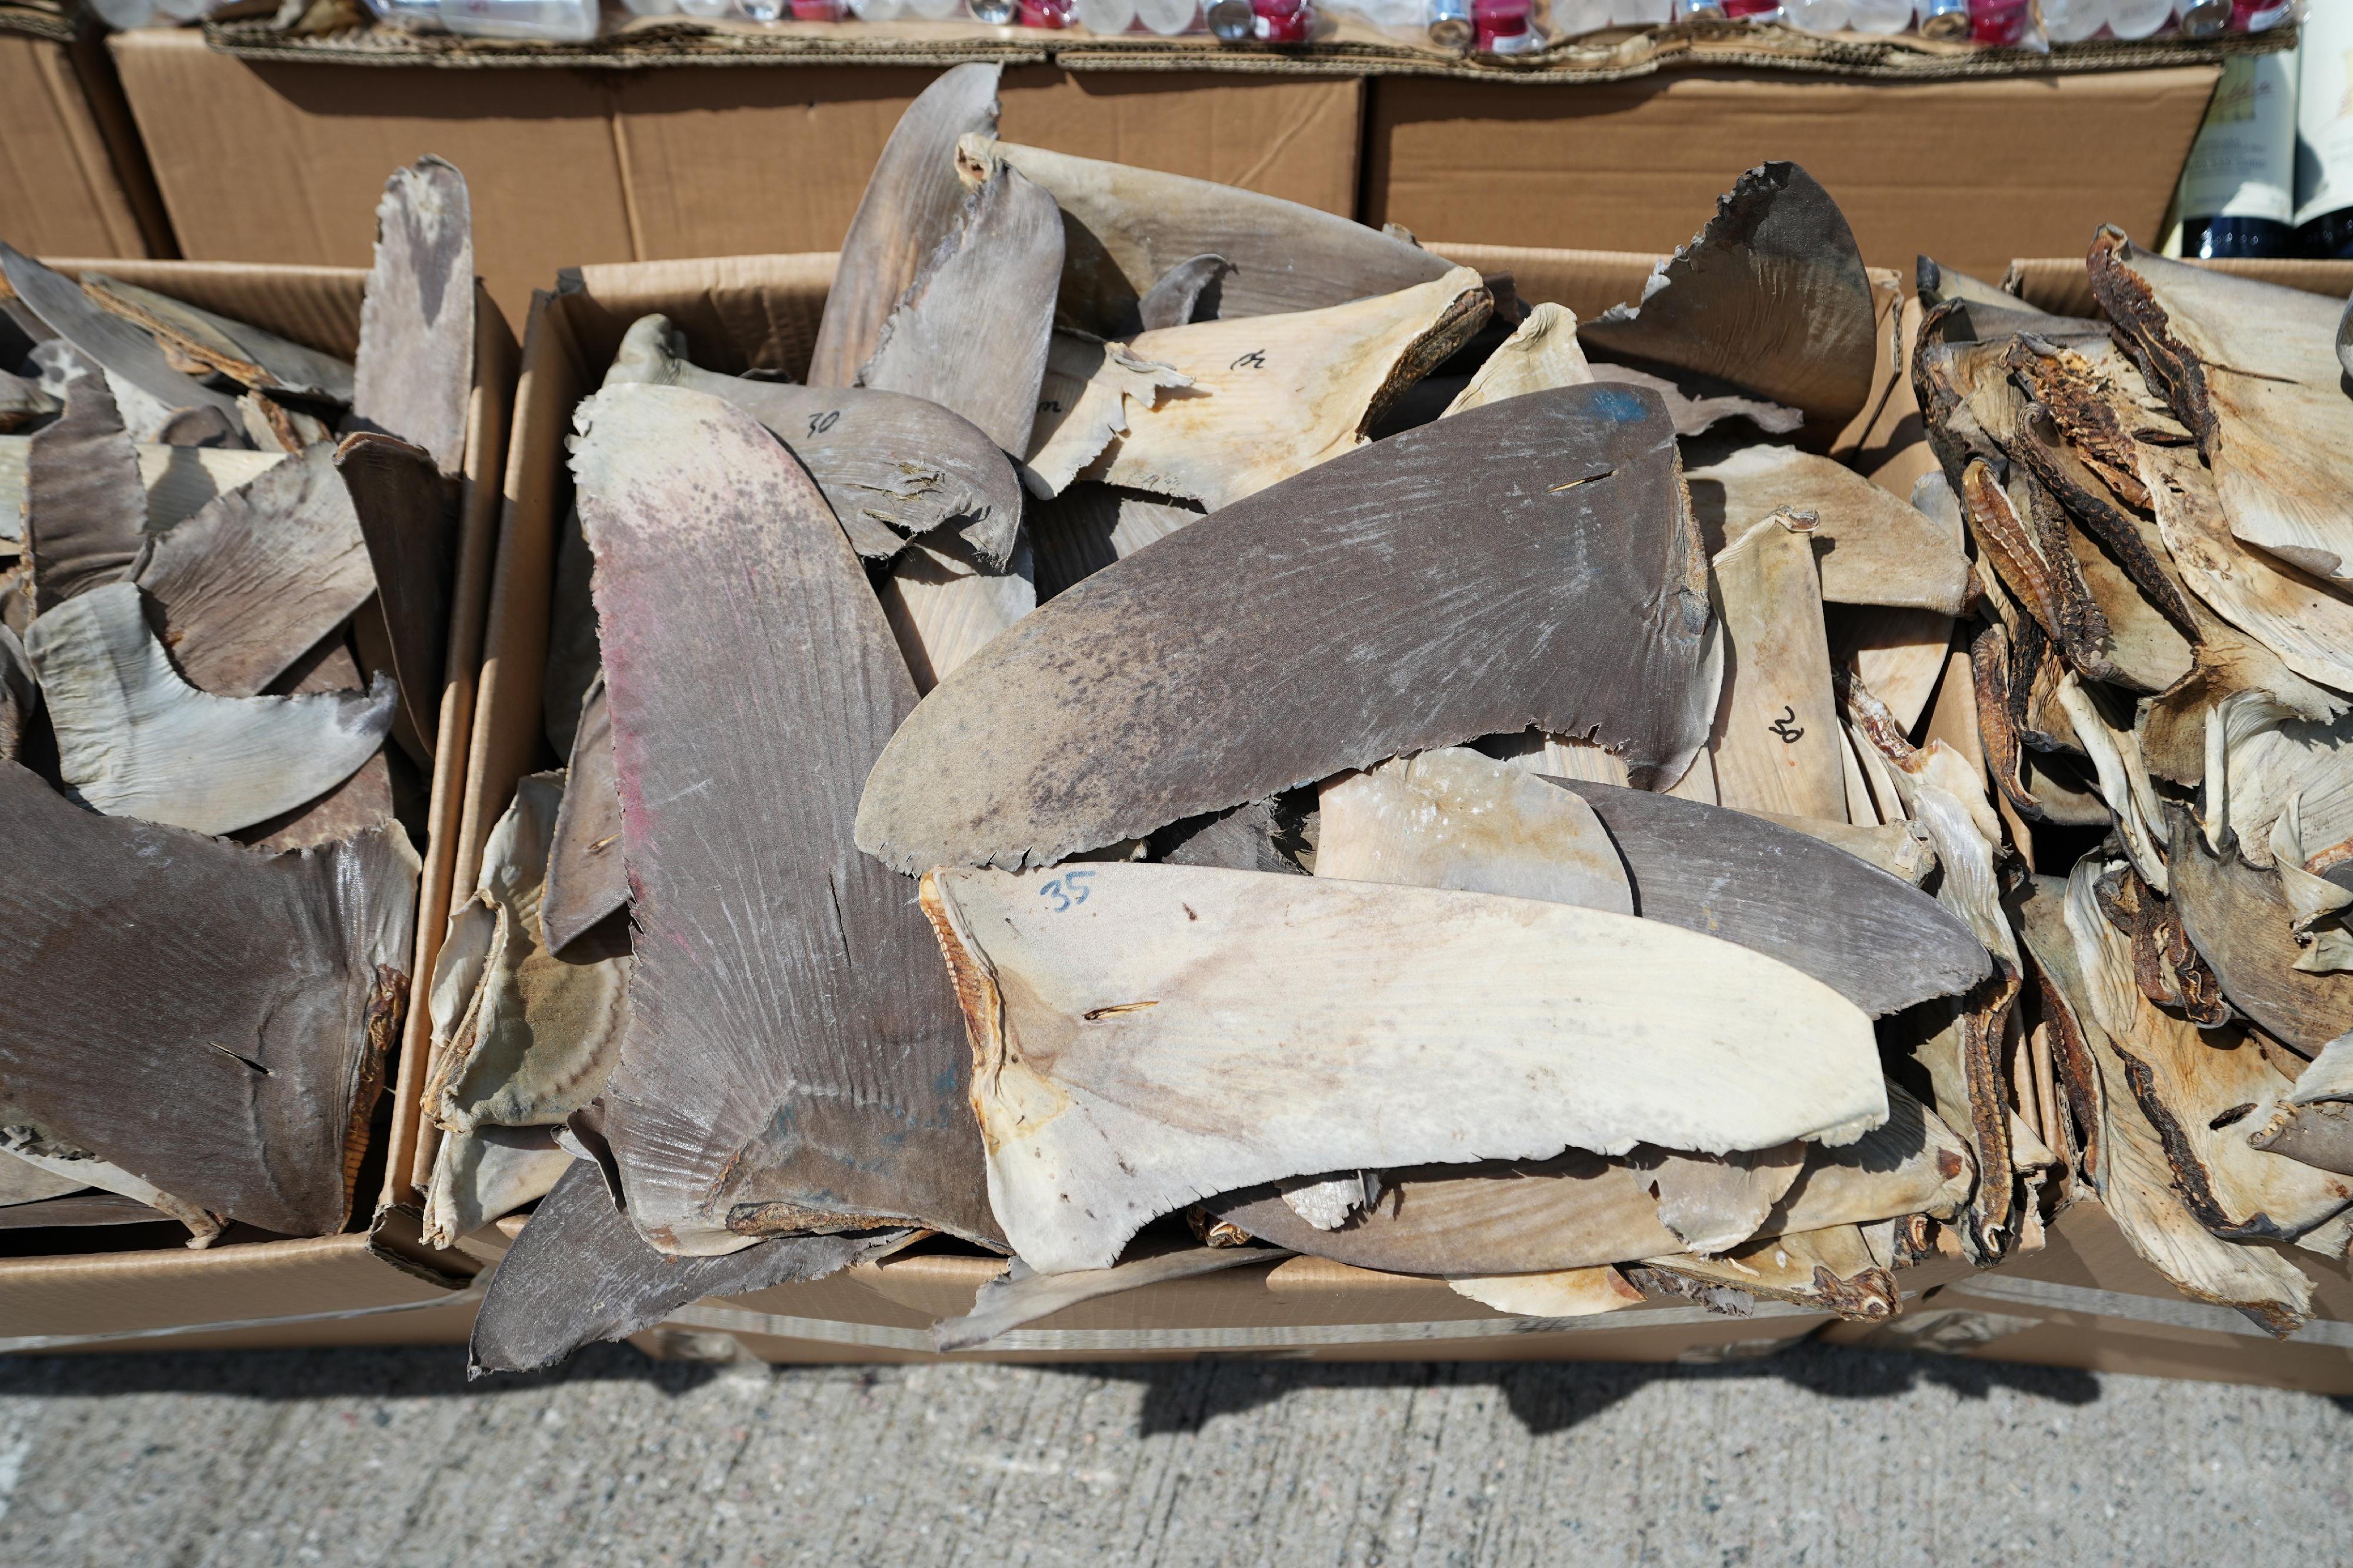 Hong Kong Customs mounted a special operation codenamed "Wave Breaker" from August to September and detected four suspected smuggling cases involving ocean-going vessels and two suspected smuggling cases involving river trade vessels. A large batch of suspected smuggled goods with a total estimated market value of about $100 million was seized. Photo shows some of the suspected scheduled shark fins seized.